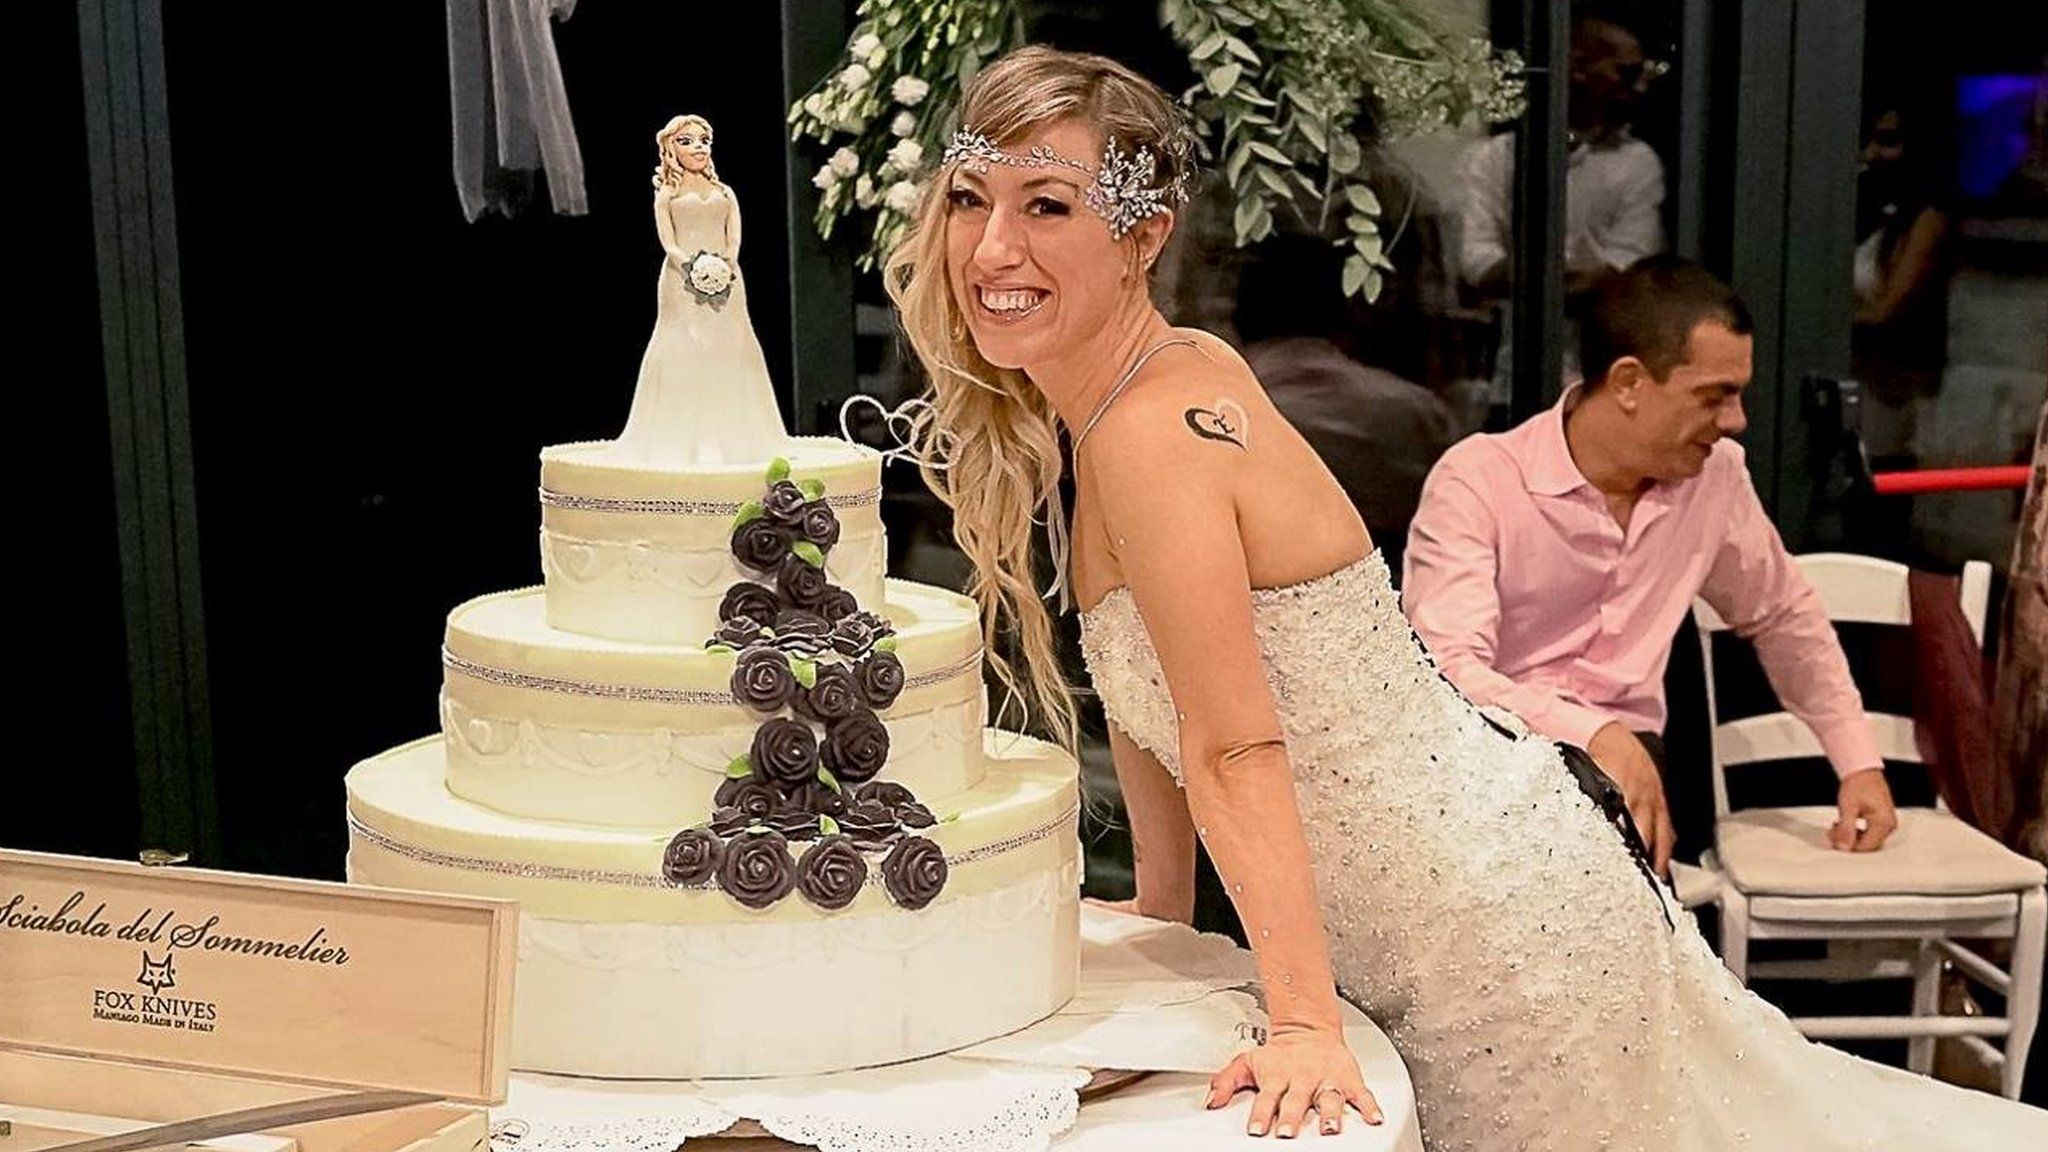 Laura Mesi, who married herself, with her wedding cake